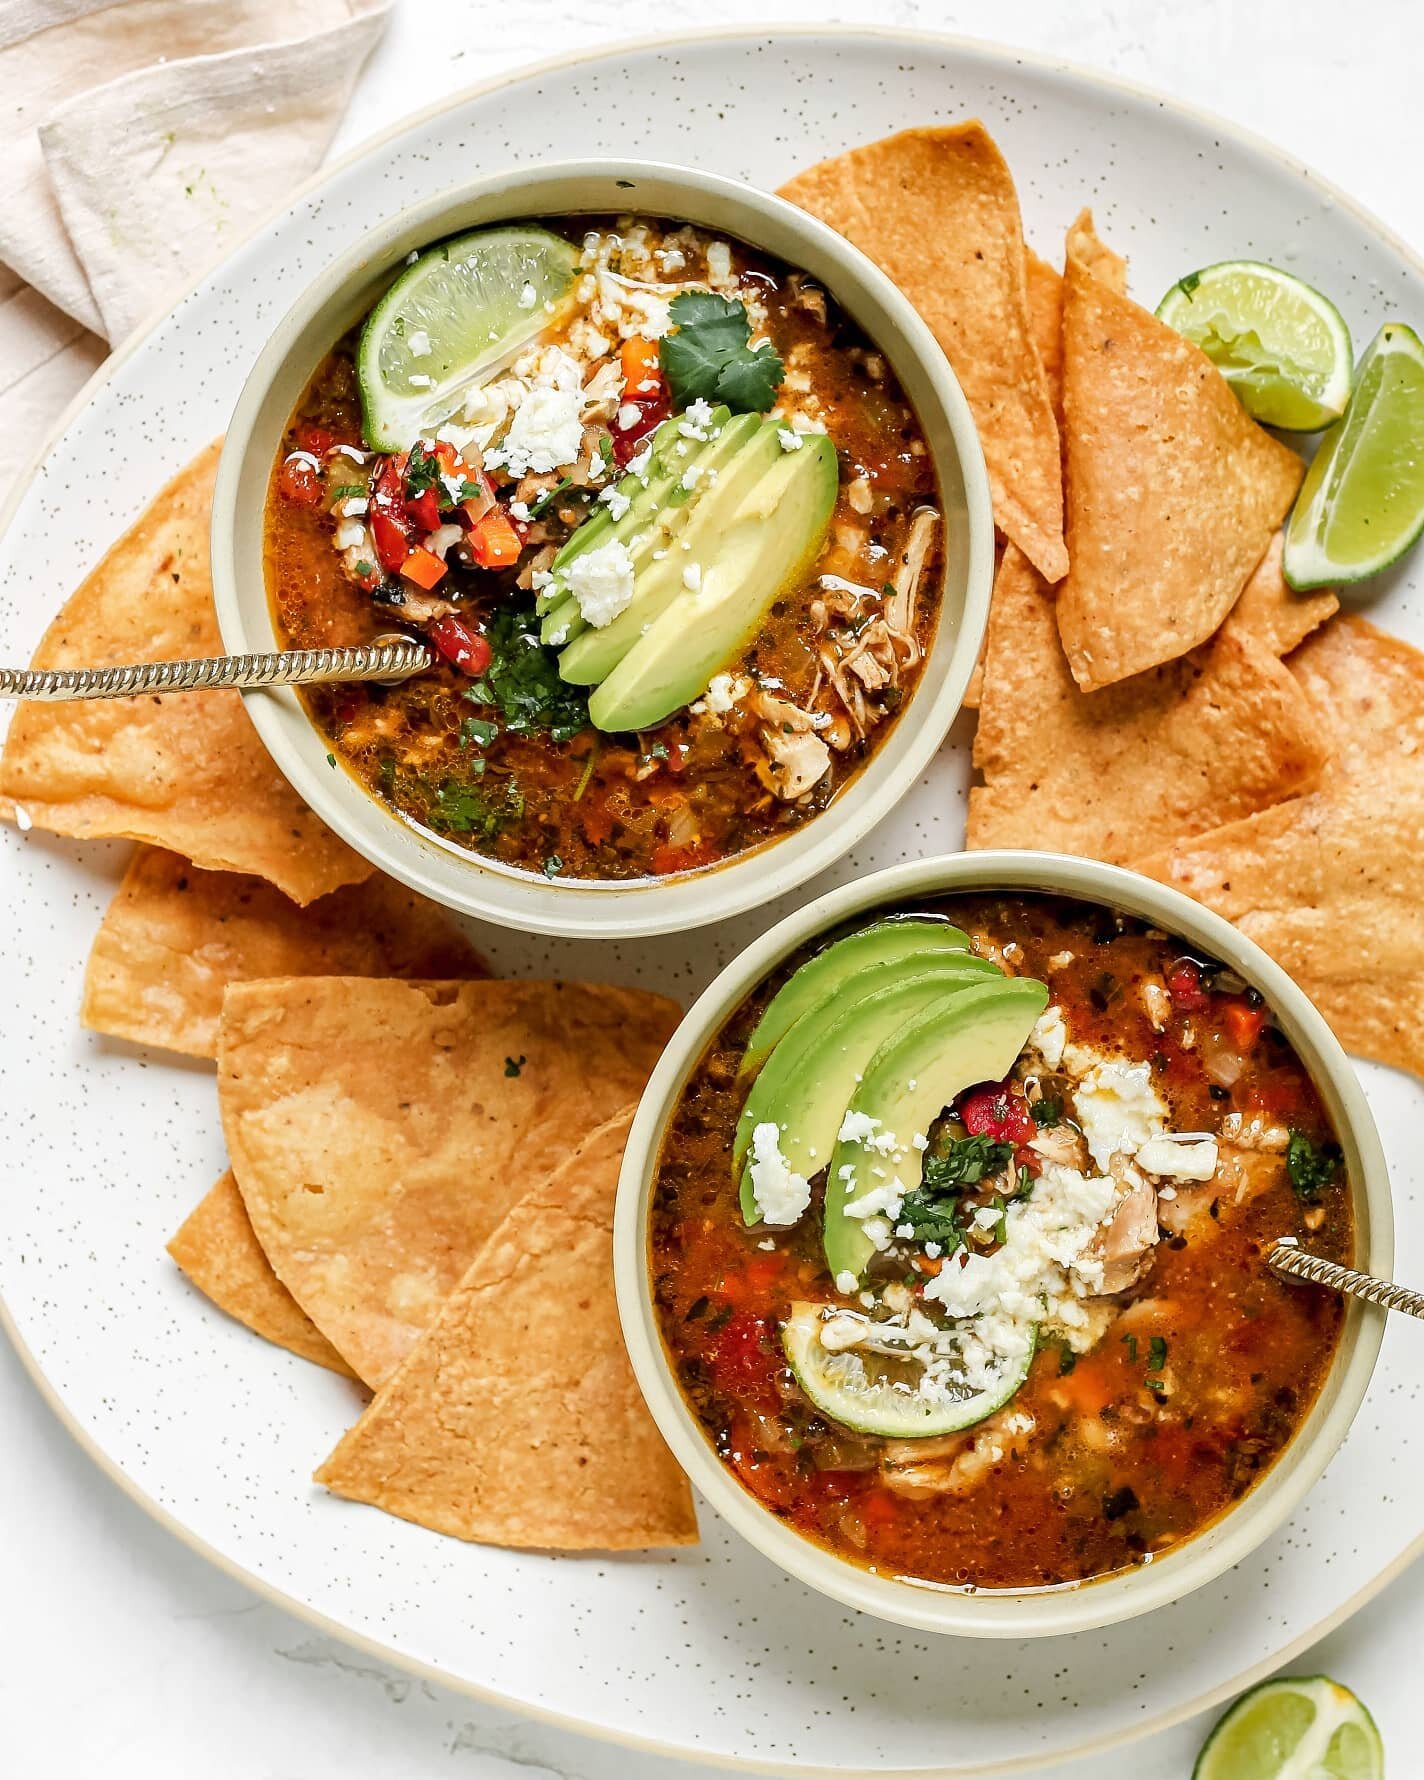 Santa Fe Spiced Chicken Tortilla Soup ☀️ new 30-minute recipe on the blog! This tortilla soup uses New Mexican Flavors and pantry staples (lime, tomatoes, mirepoix) for a toasty, comforting bowl that&rsquo;s textured and spiced with cumin, ancho chil